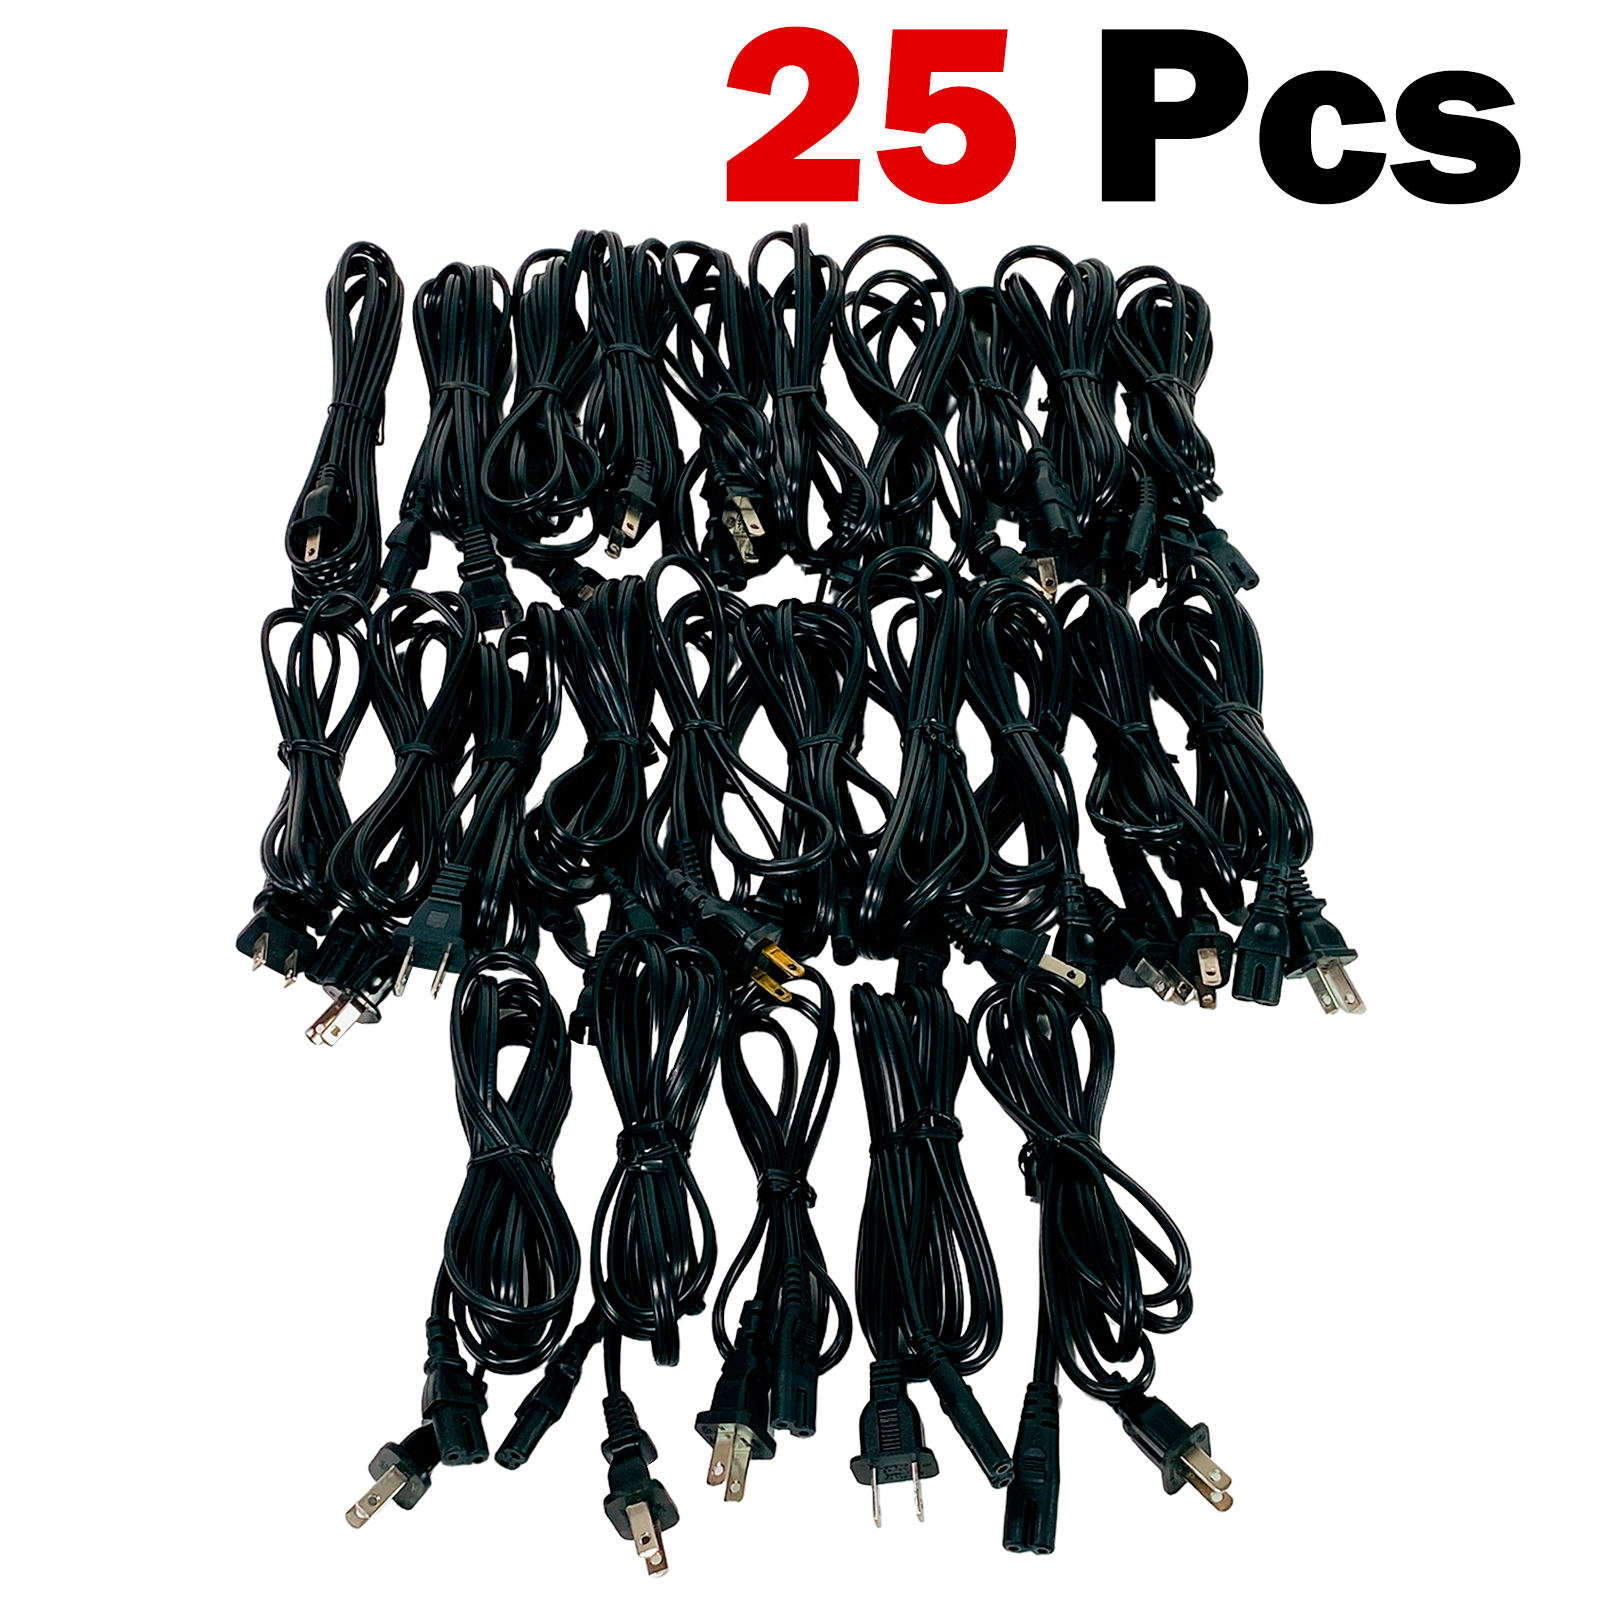 Branded Genuine LOT 6ft 2-Prong Non-Polarized AC Power Cord HIGH QUALITY Grade A